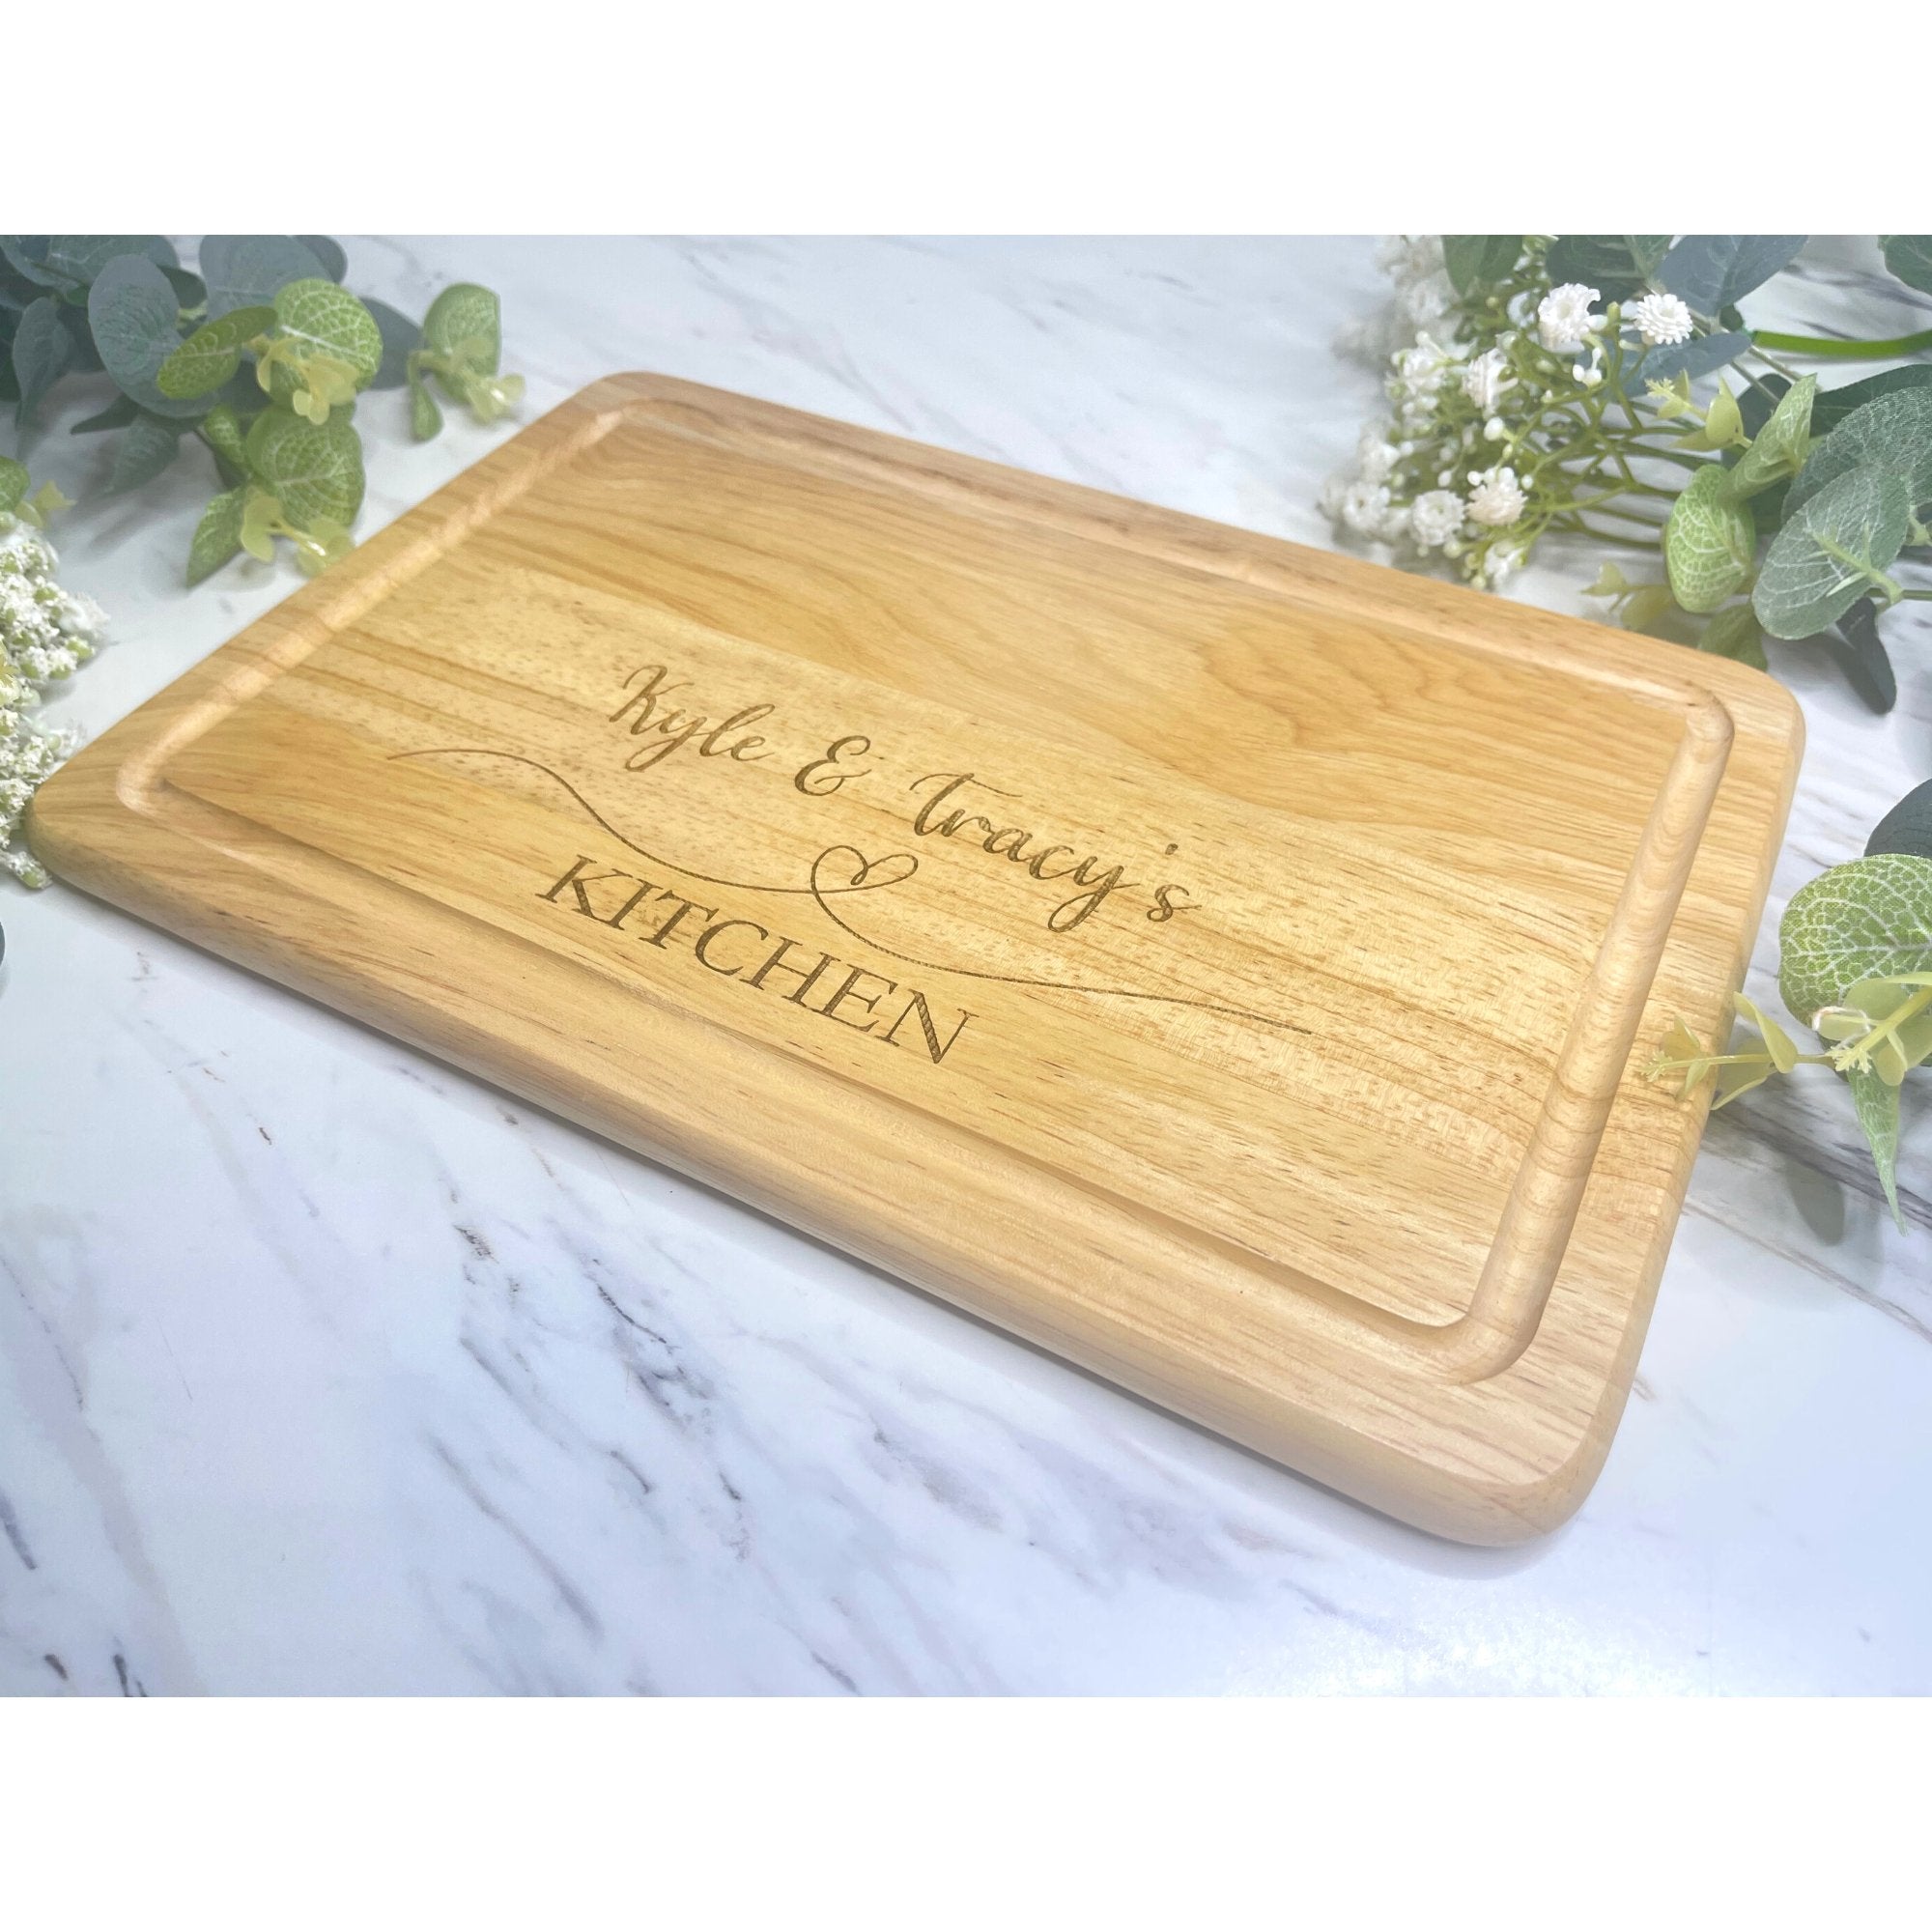 Personalised Gifts for Couples Collection - Thoughtful and unique presents for weddings, anniversaries, and special occasions. Explore custom-engraved items for a memorable touch.